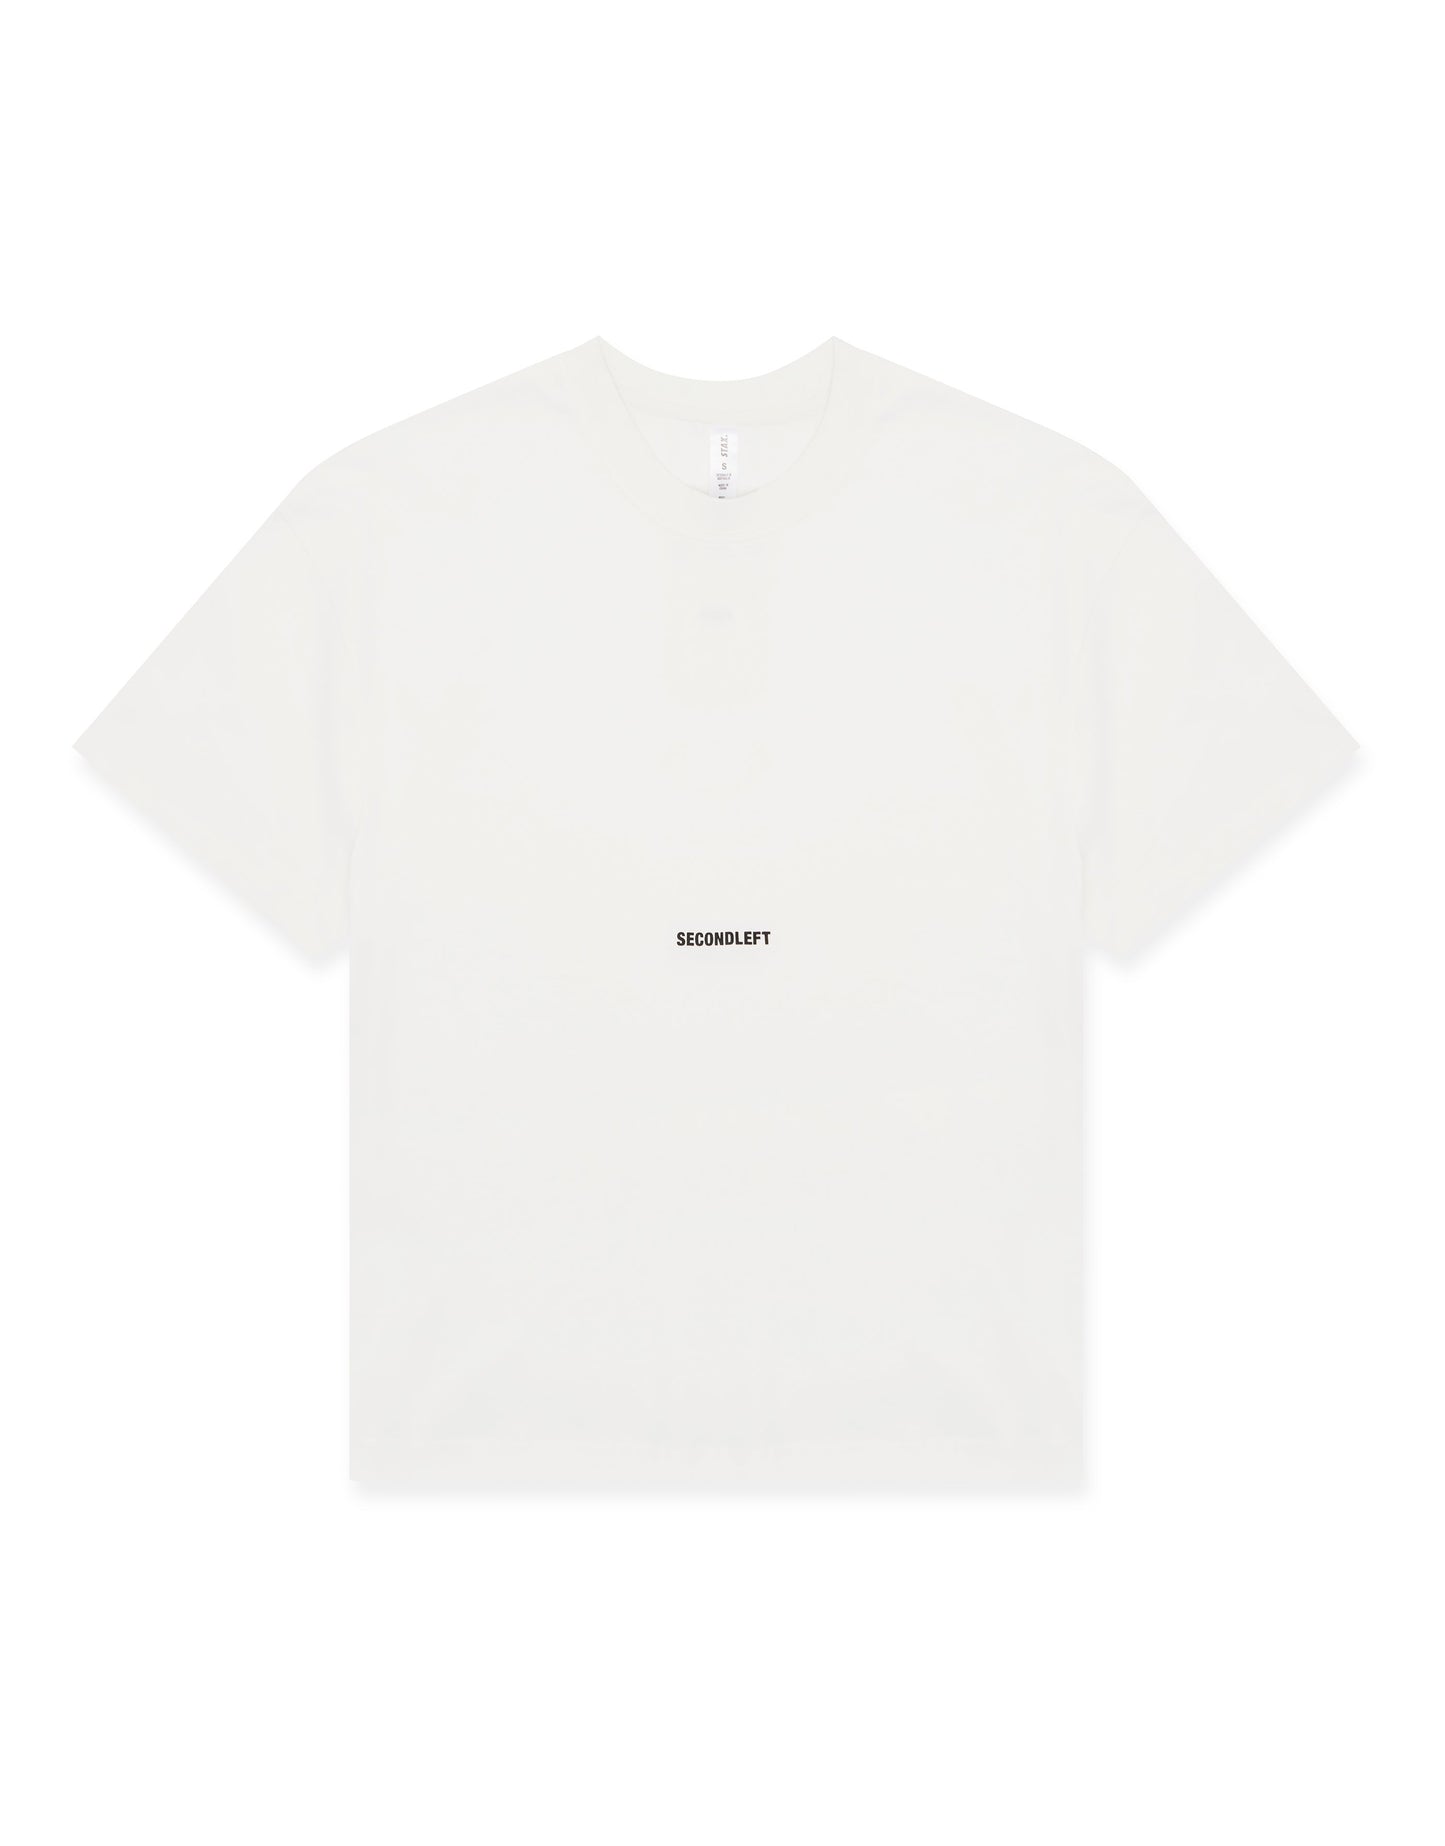 SL Cropped Classic Tee - White